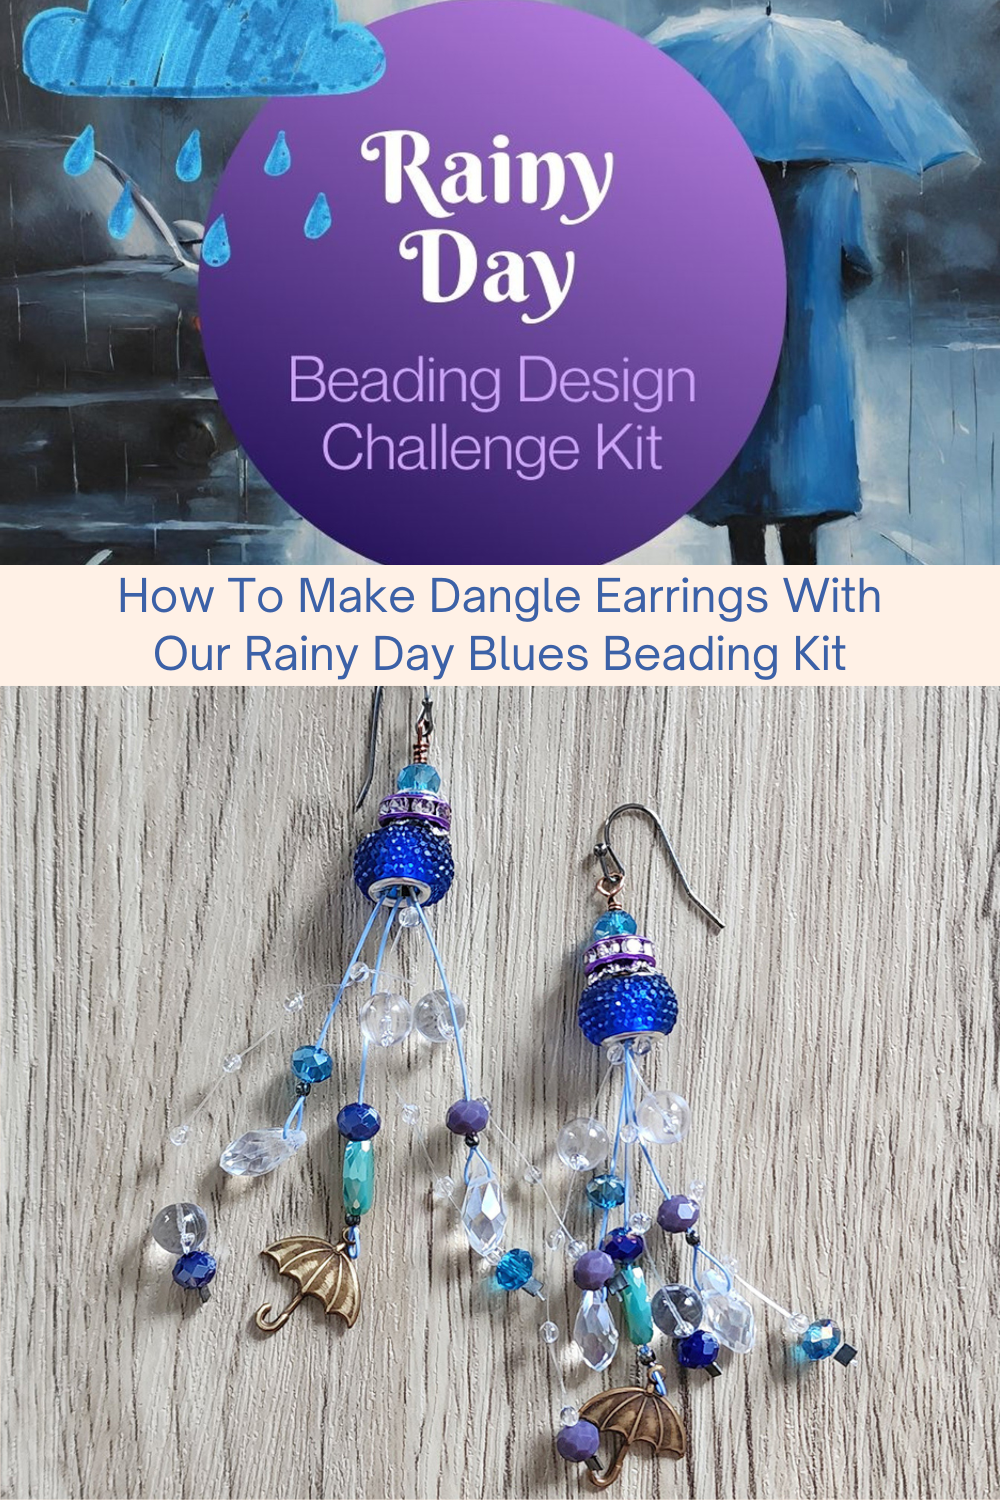 How To Make Dangle Earrings With Our Rainy Day Blues Beading Kit Collage